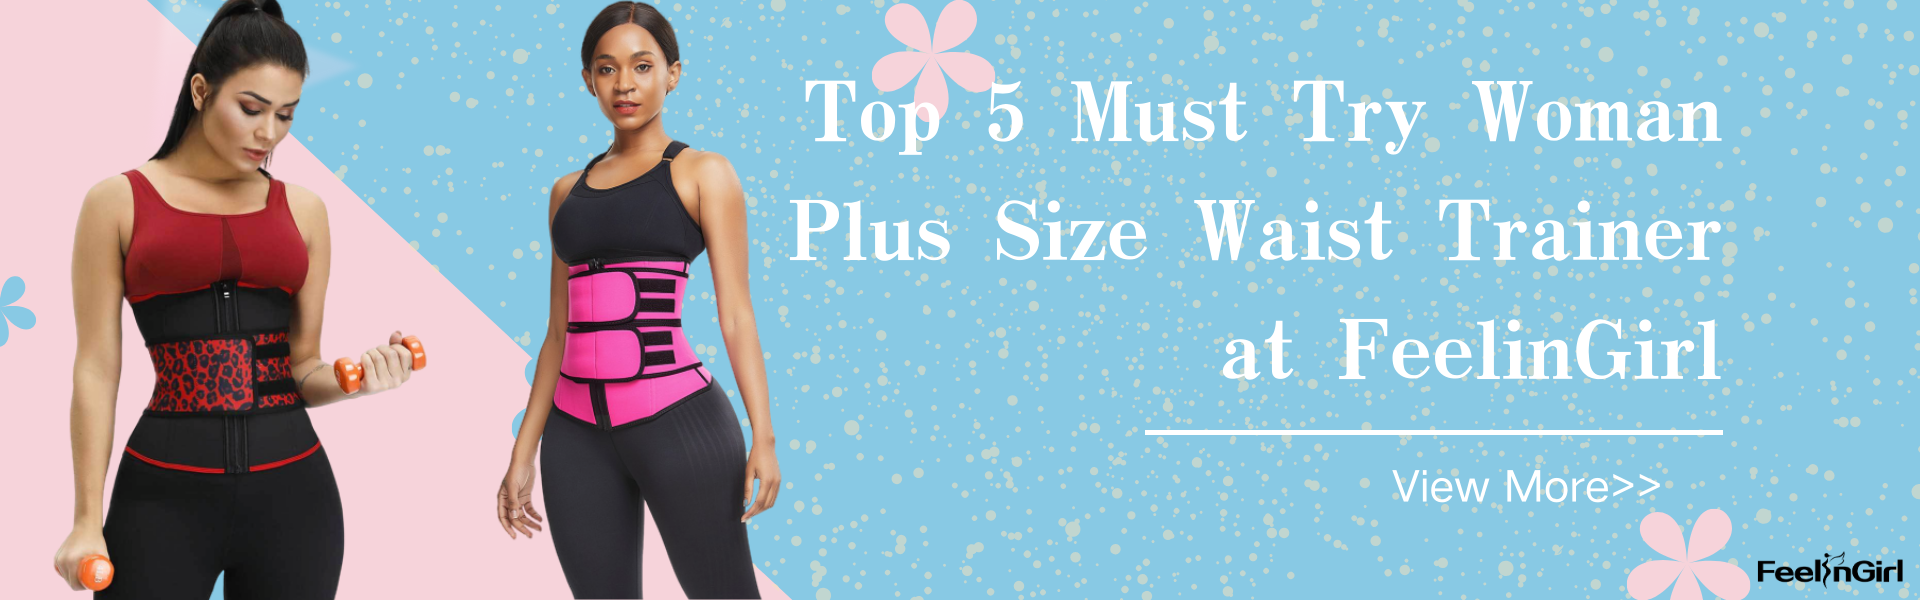 Top 5 Must Try Woman Plus Size Waist Trainer at FeelinGirl